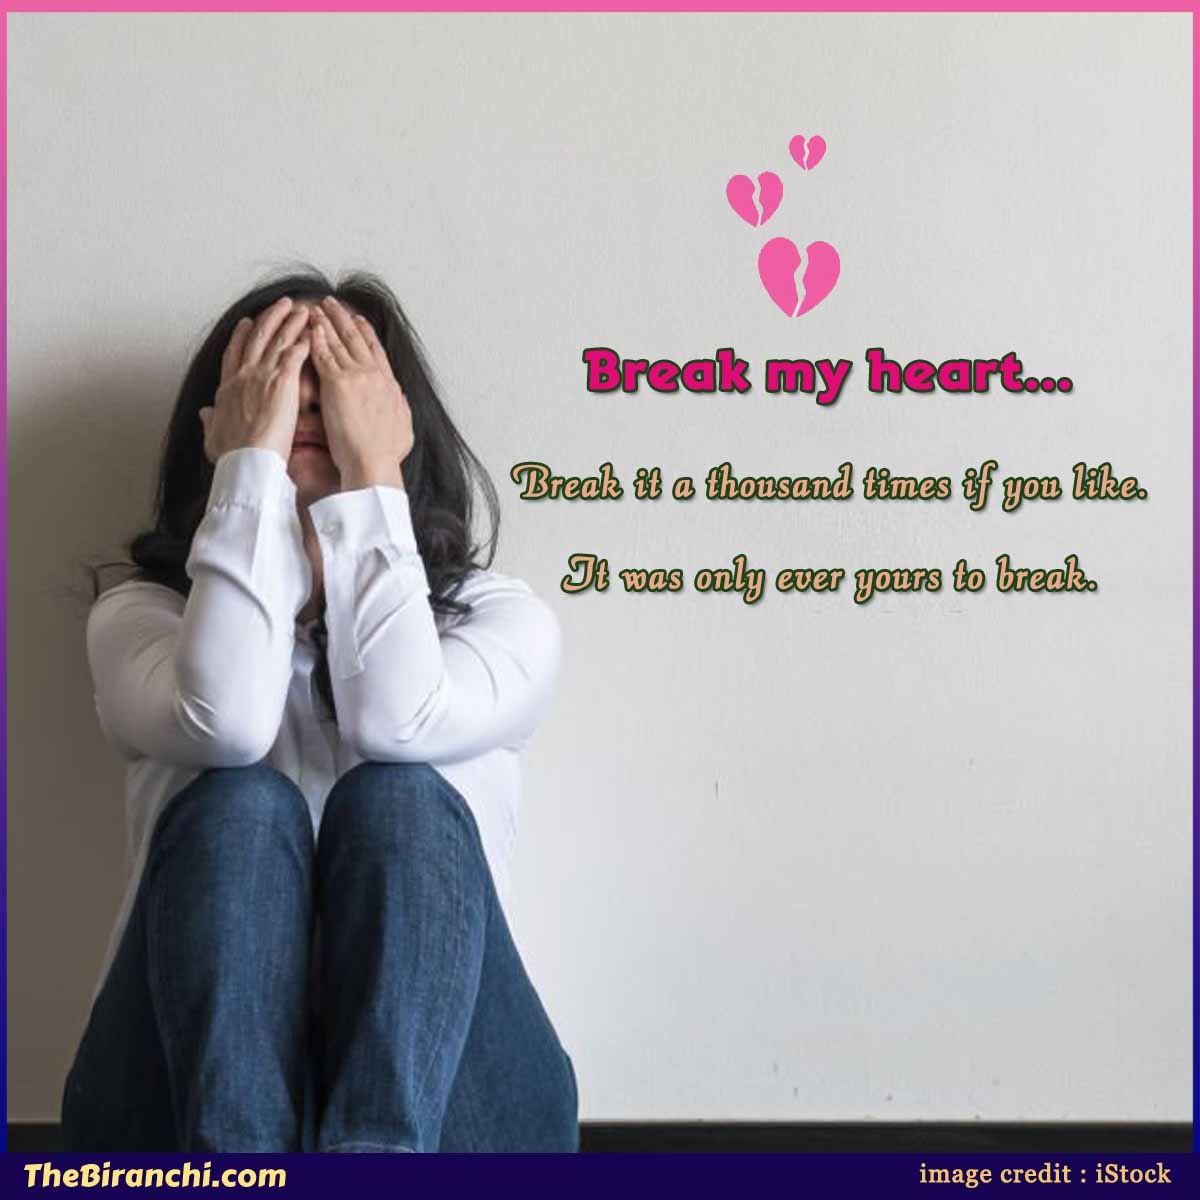 break-my-heart-a-thousand-times-romantic-love-quotes-for-your-sweetheart